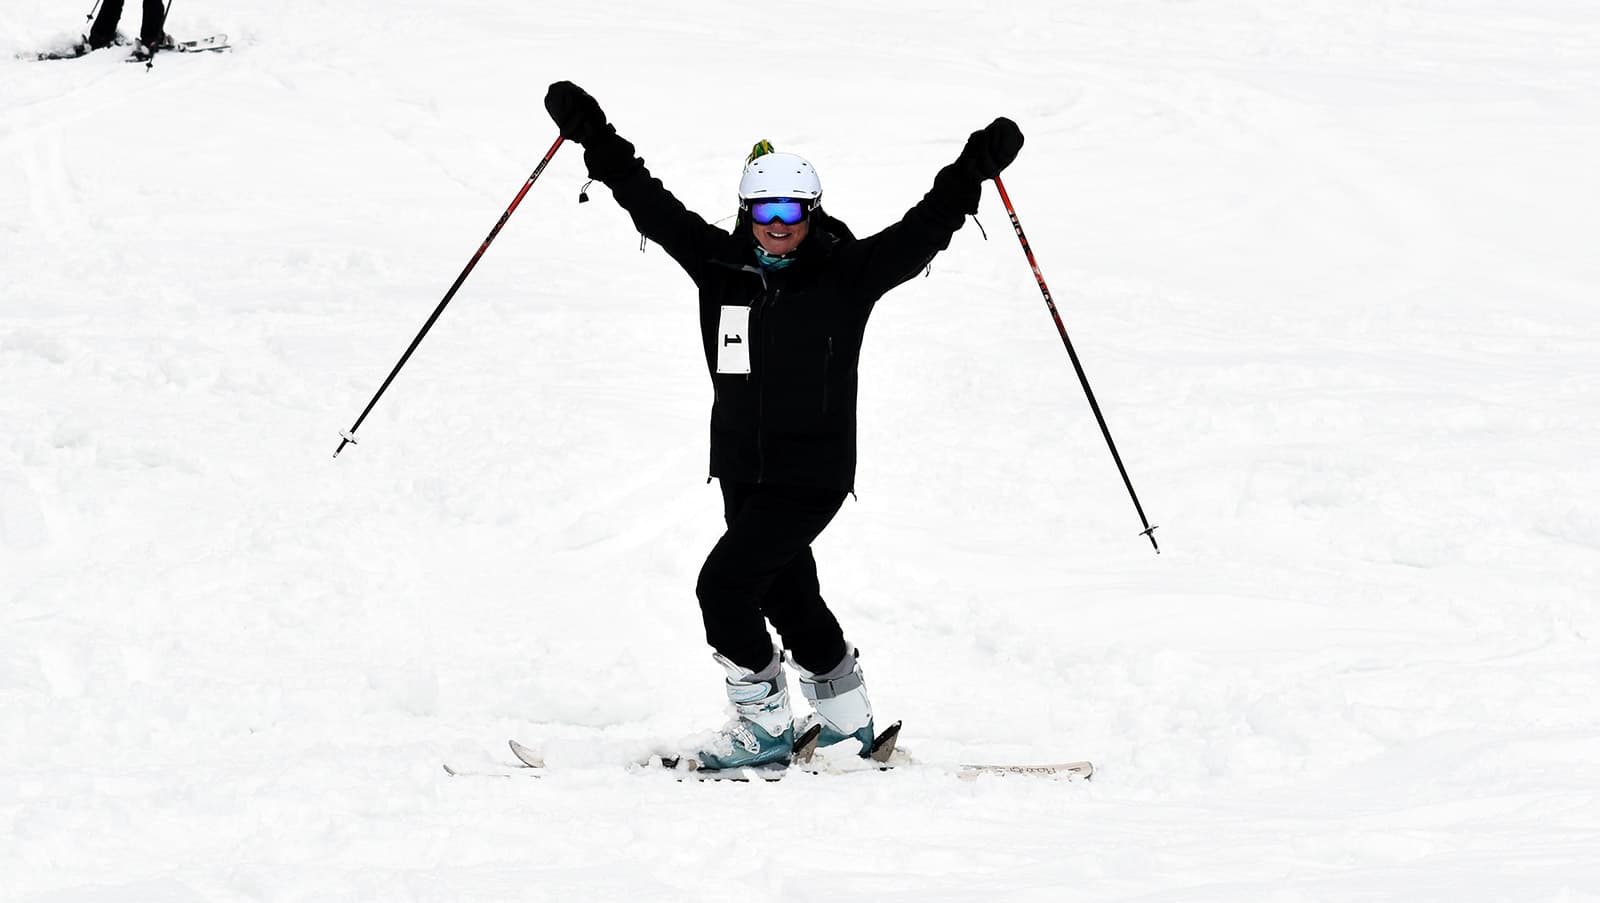 UMFK President Hedeen cheers at the end of her downhill ski run